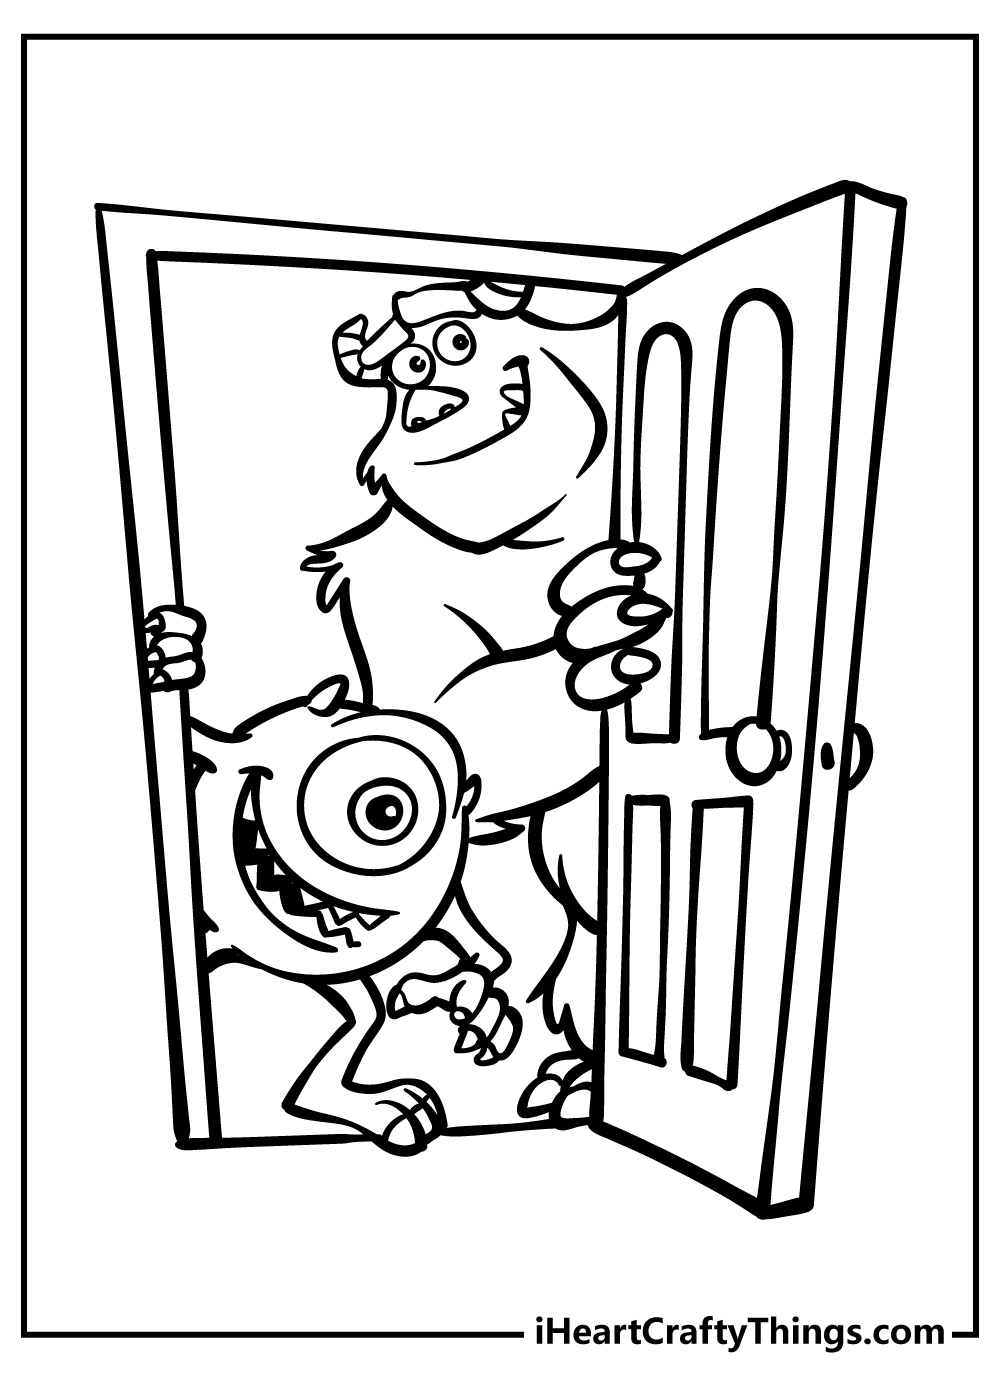 Monsters Inc. Coloring Sheet for children free download